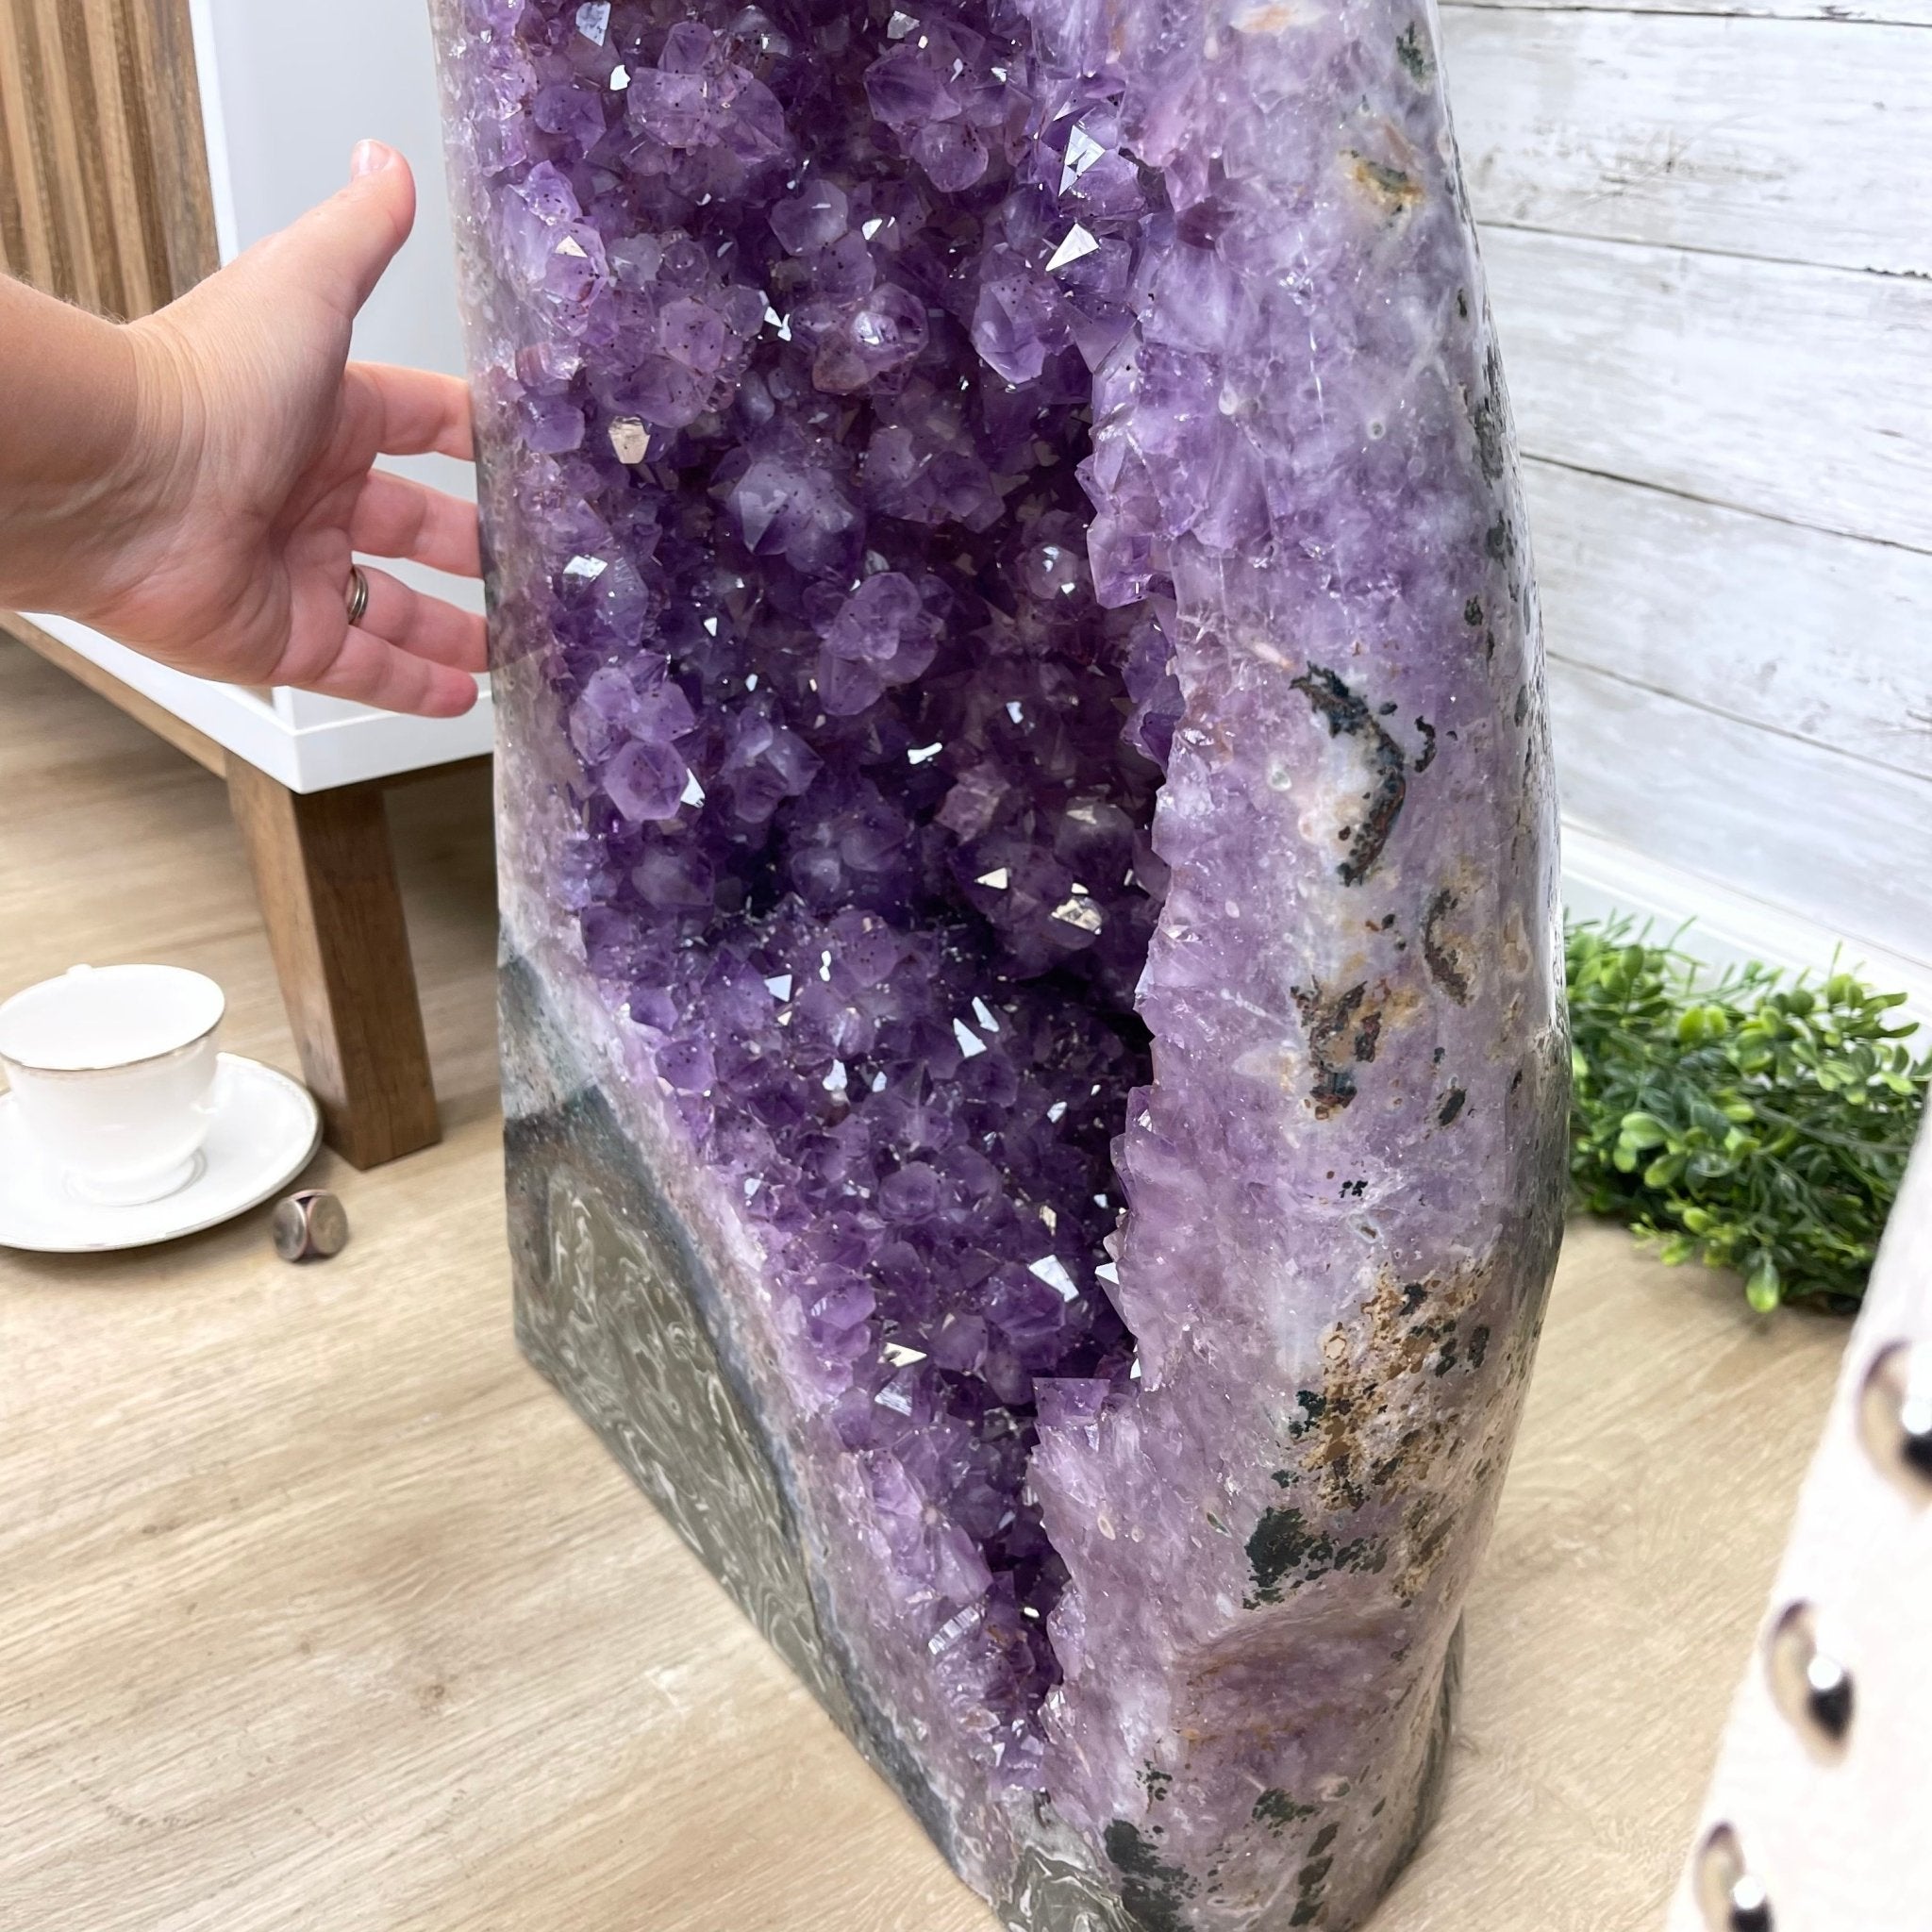 Large Extra Plus Quality Polished Brazilian Amethyst Cathedral, 155.3 lbs & 52” Tall Model #5602-0145 by Brazil Gems - Brazil GemsBrazil GemsLarge Extra Plus Quality Polished Brazilian Amethyst Cathedral, 155.3 lbs & 52” Tall Model #5602-0145 by Brazil GemsPolished Cathedrals5602-0145